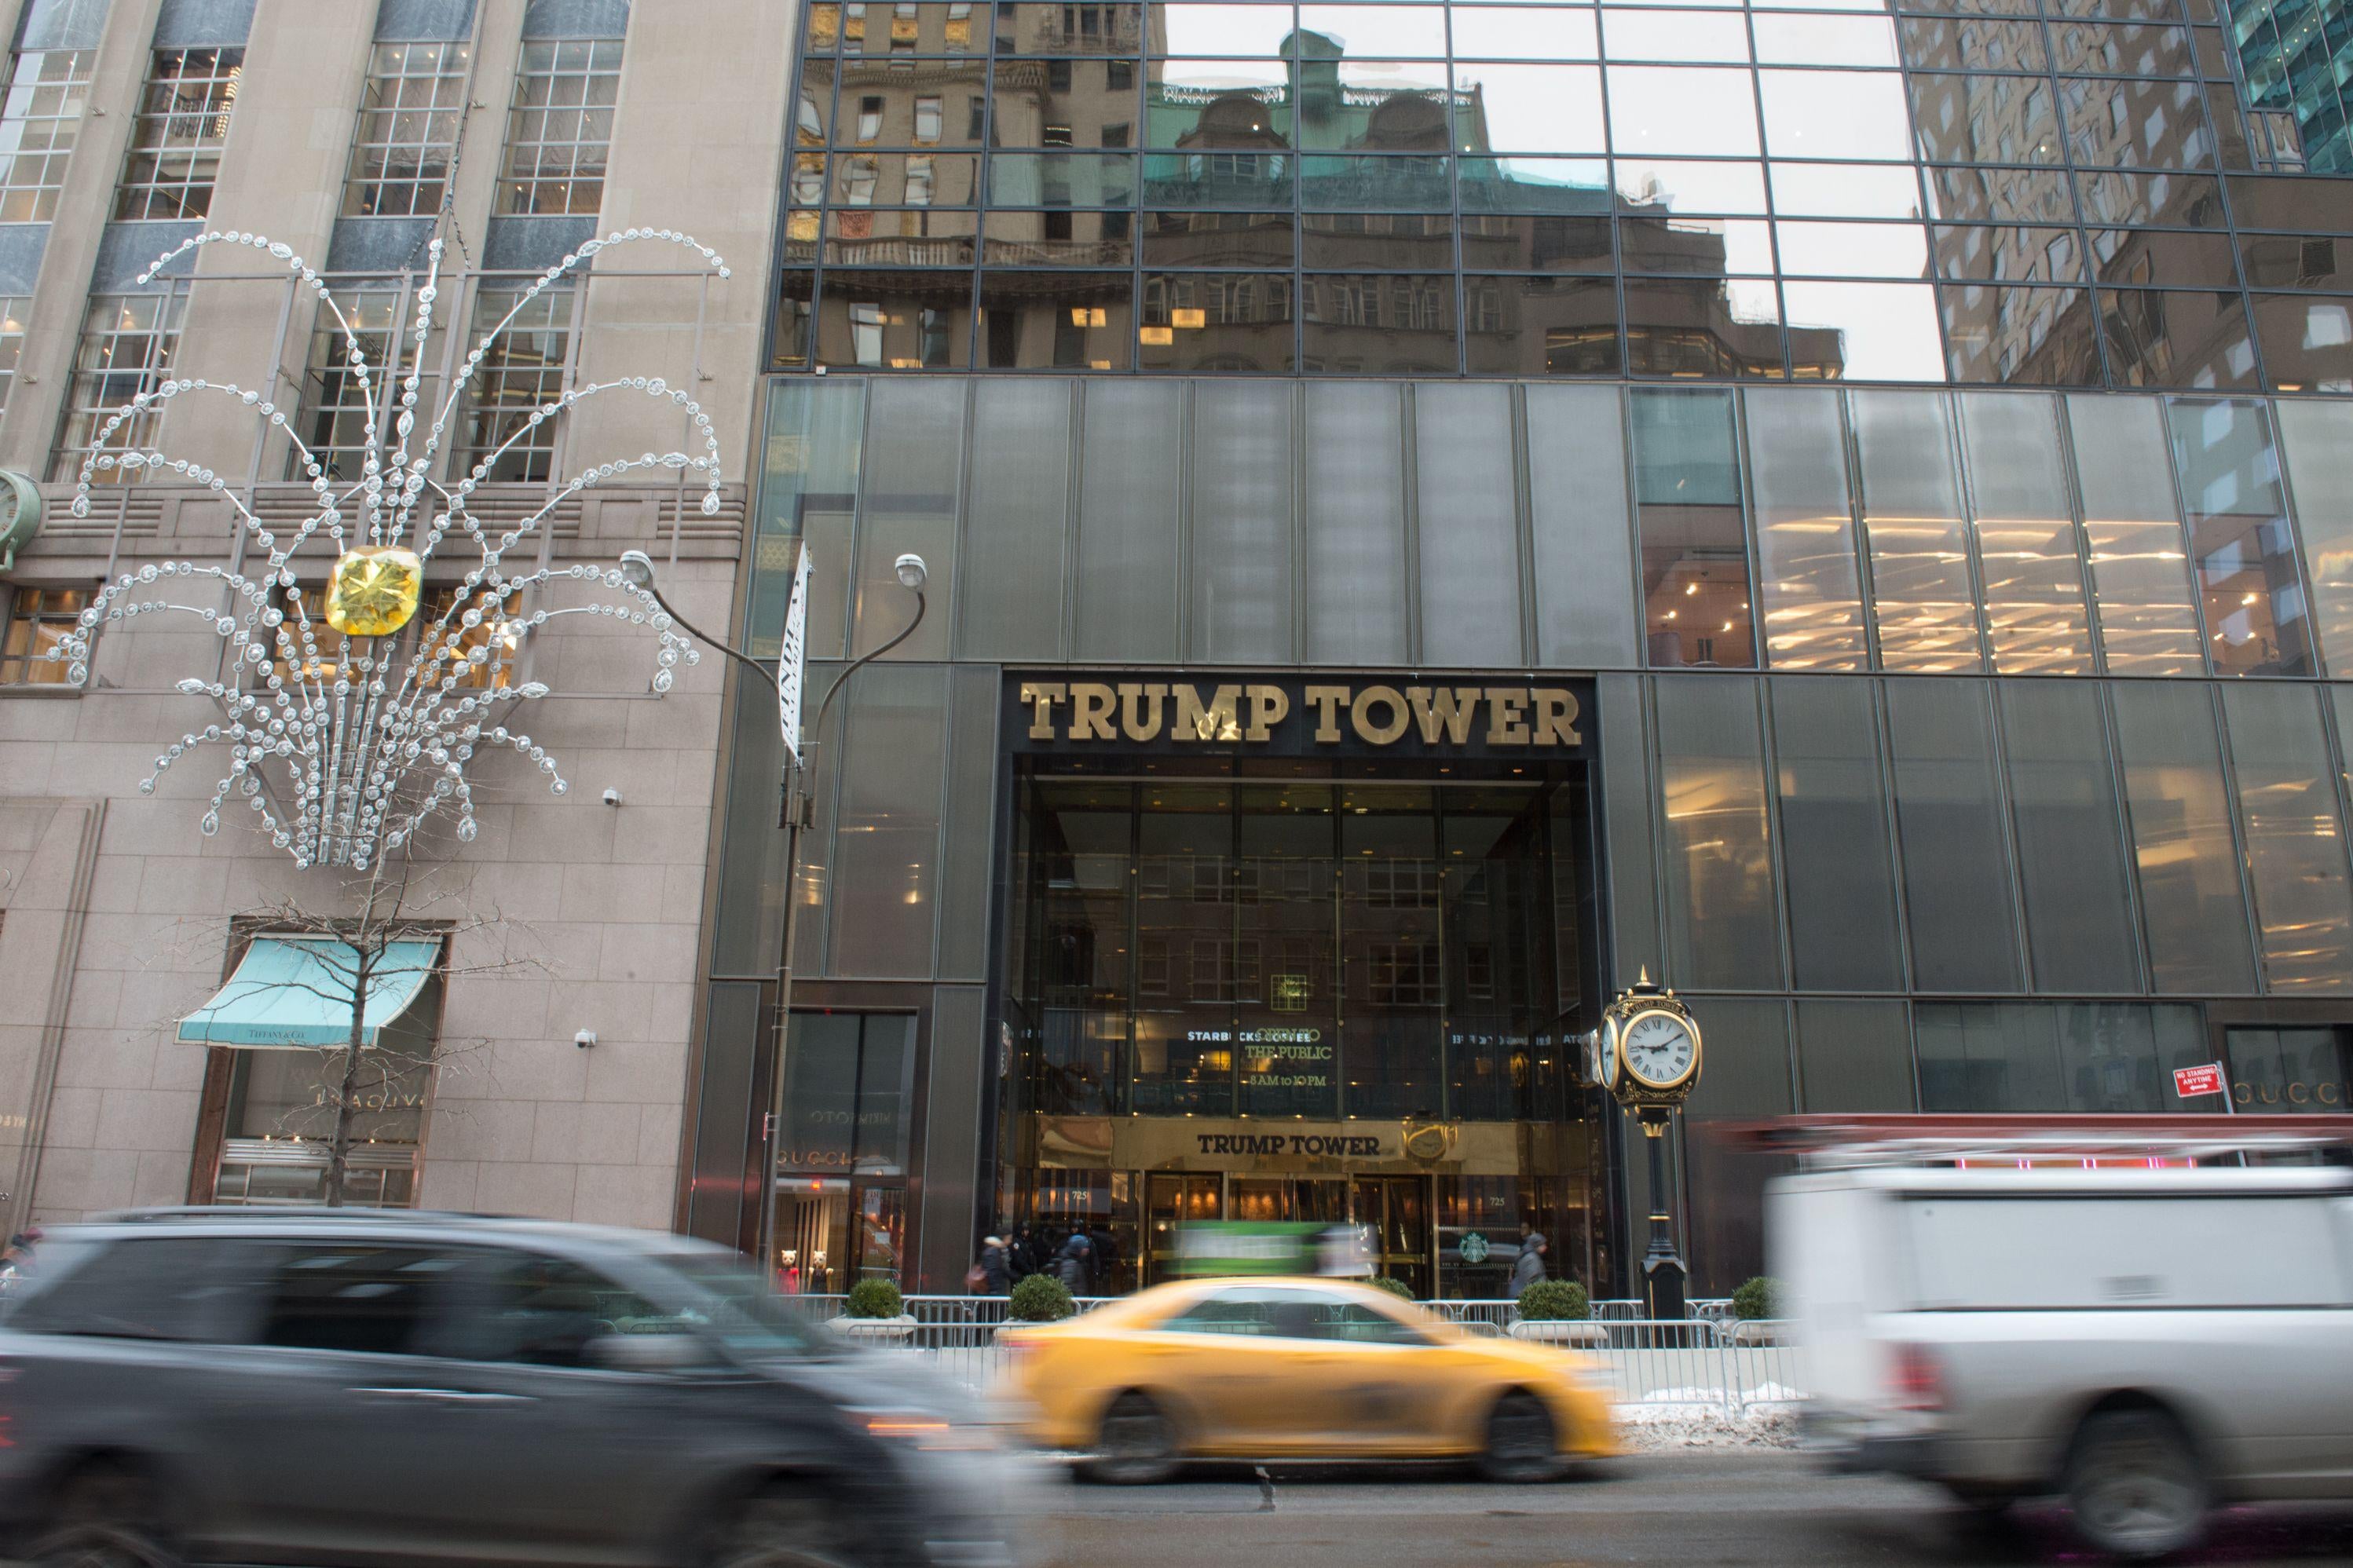 Cars drive past the front of Trump Tower on Fifth Avenue on January 8, 2018 in New York.
A fire in the Trump Tower ventilation system in New York City caused a serious injury earlier in the morning, a spokesman for the fire department said. The fire in this 58-story tower on 5th Avenue, occurred just before 7:00 am local time (12:00 GMT), in the heating system. / AFP PHOTO / Bryan R. Smith        (Photo credit should read BRYAN R. SMITH/AFP/Getty Images)